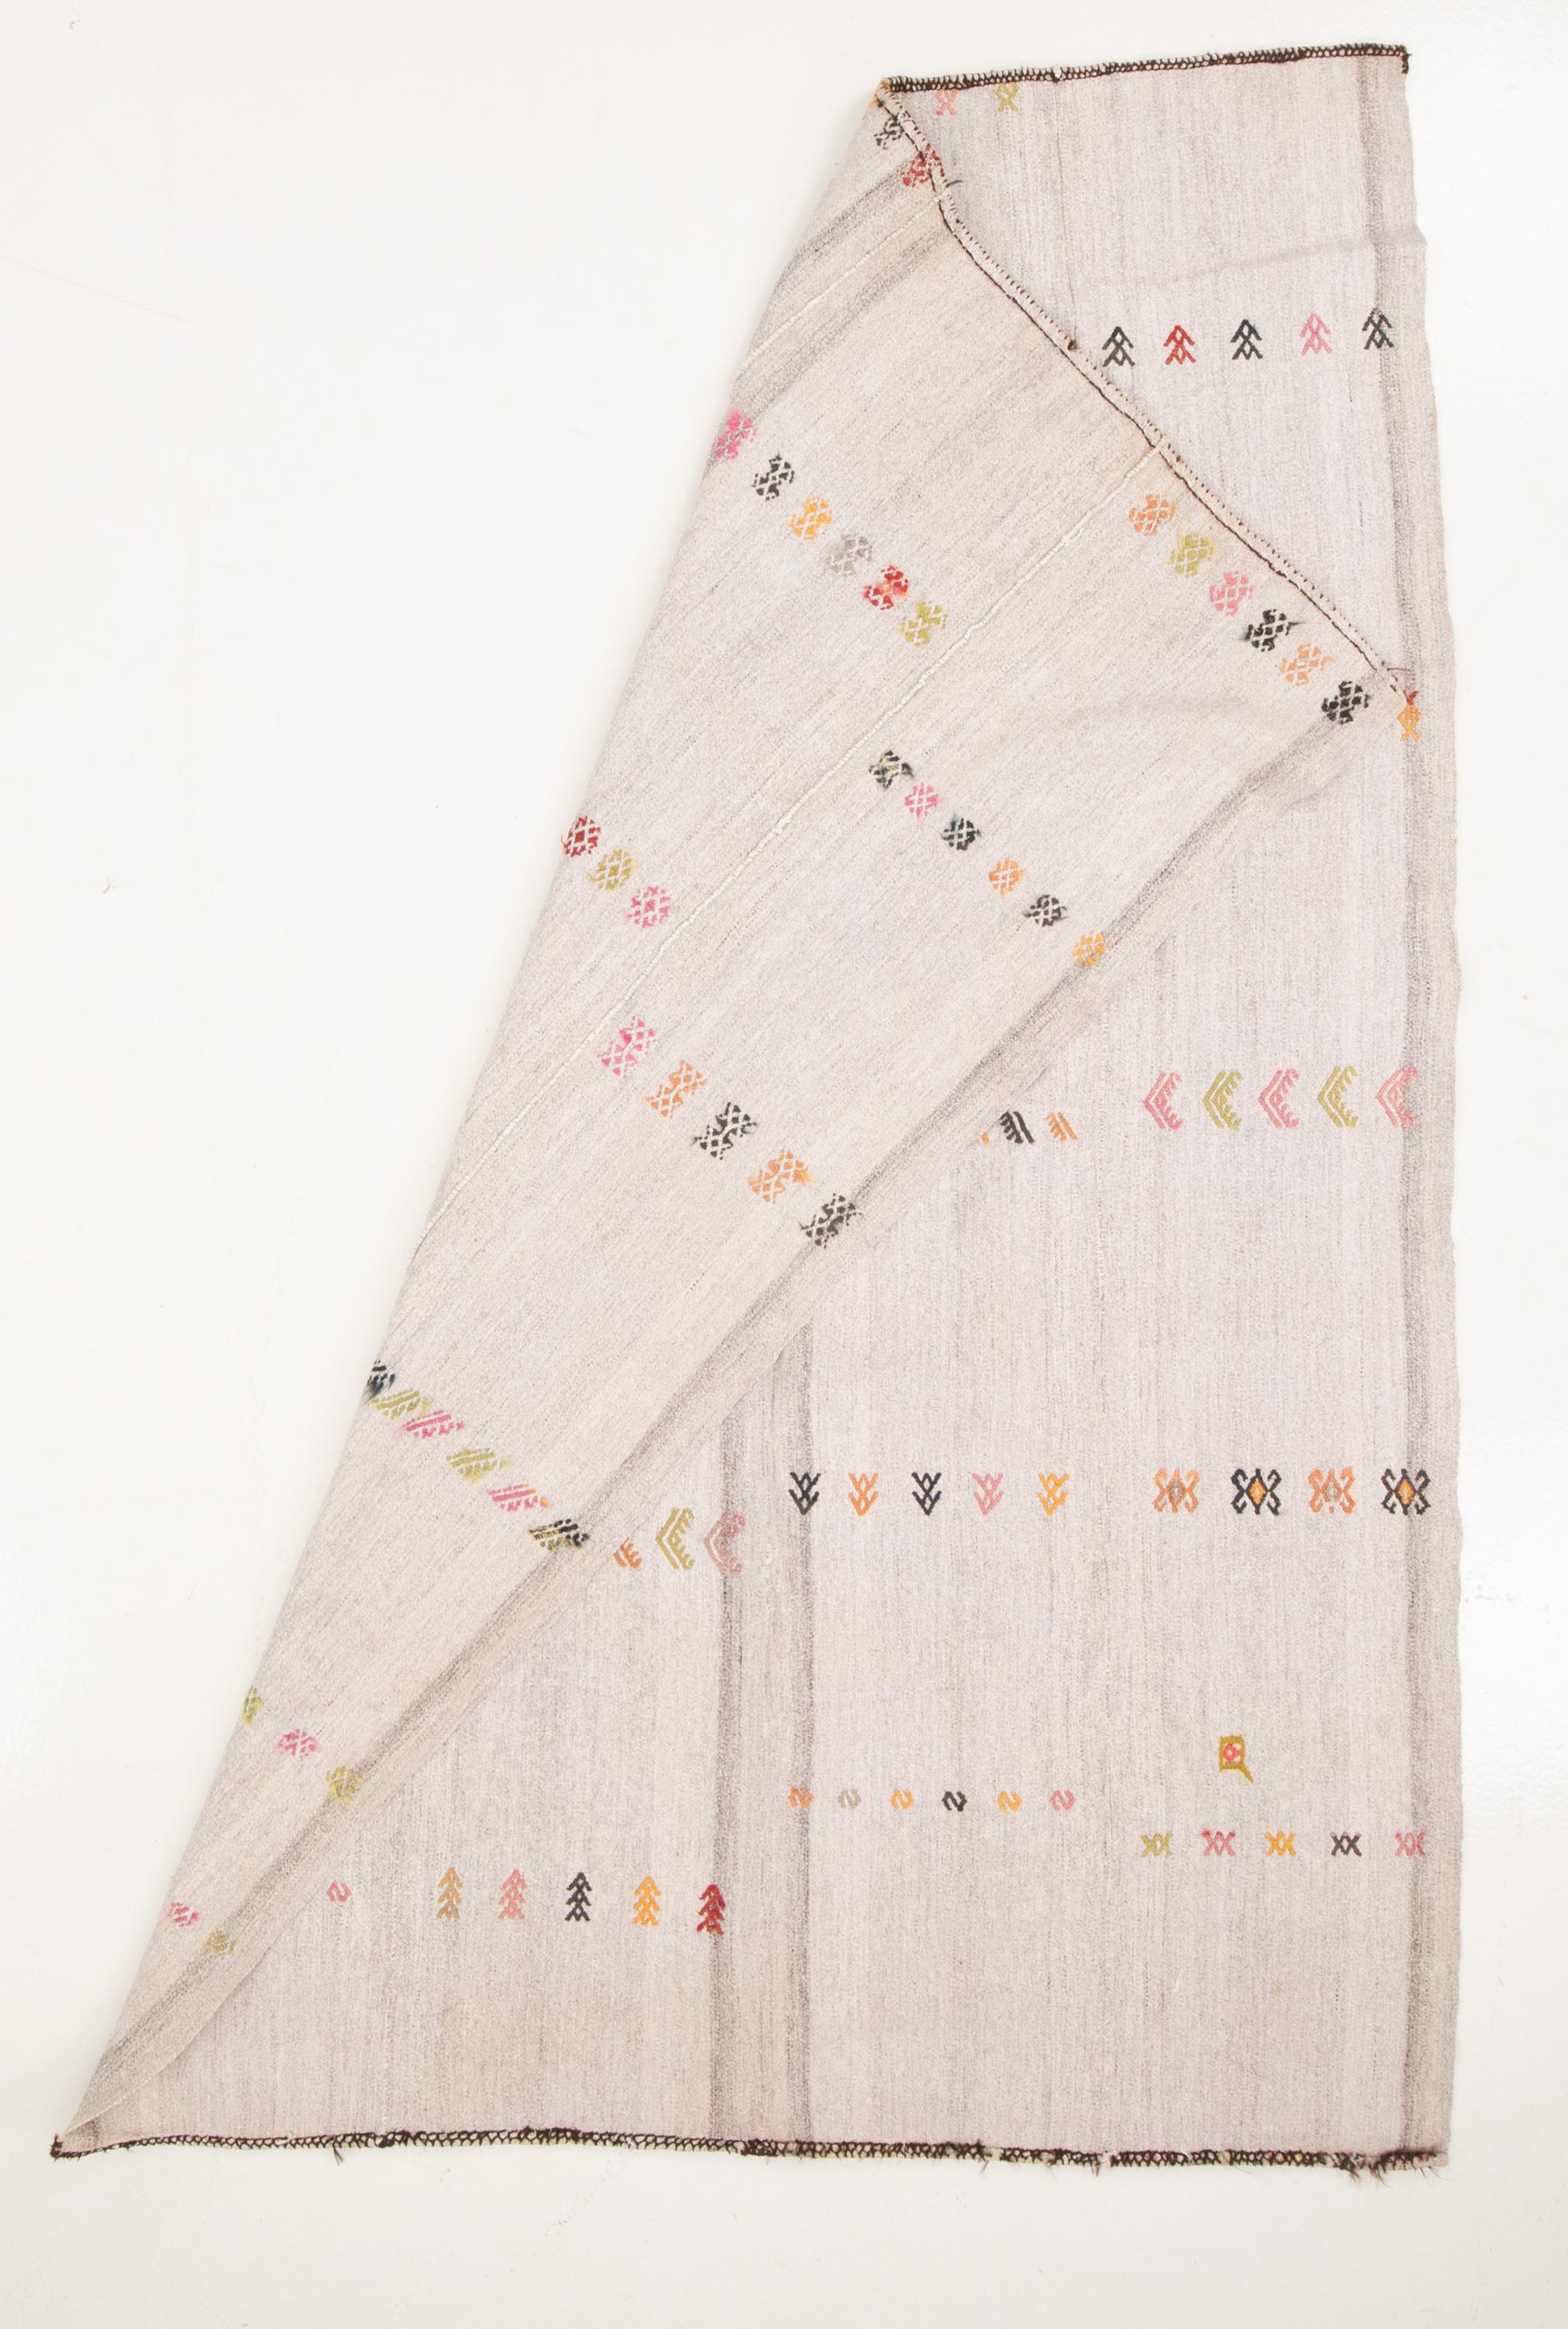 Anatolian Kilim, Cotton and Goat Hair Mix, 1960s For Sale 2